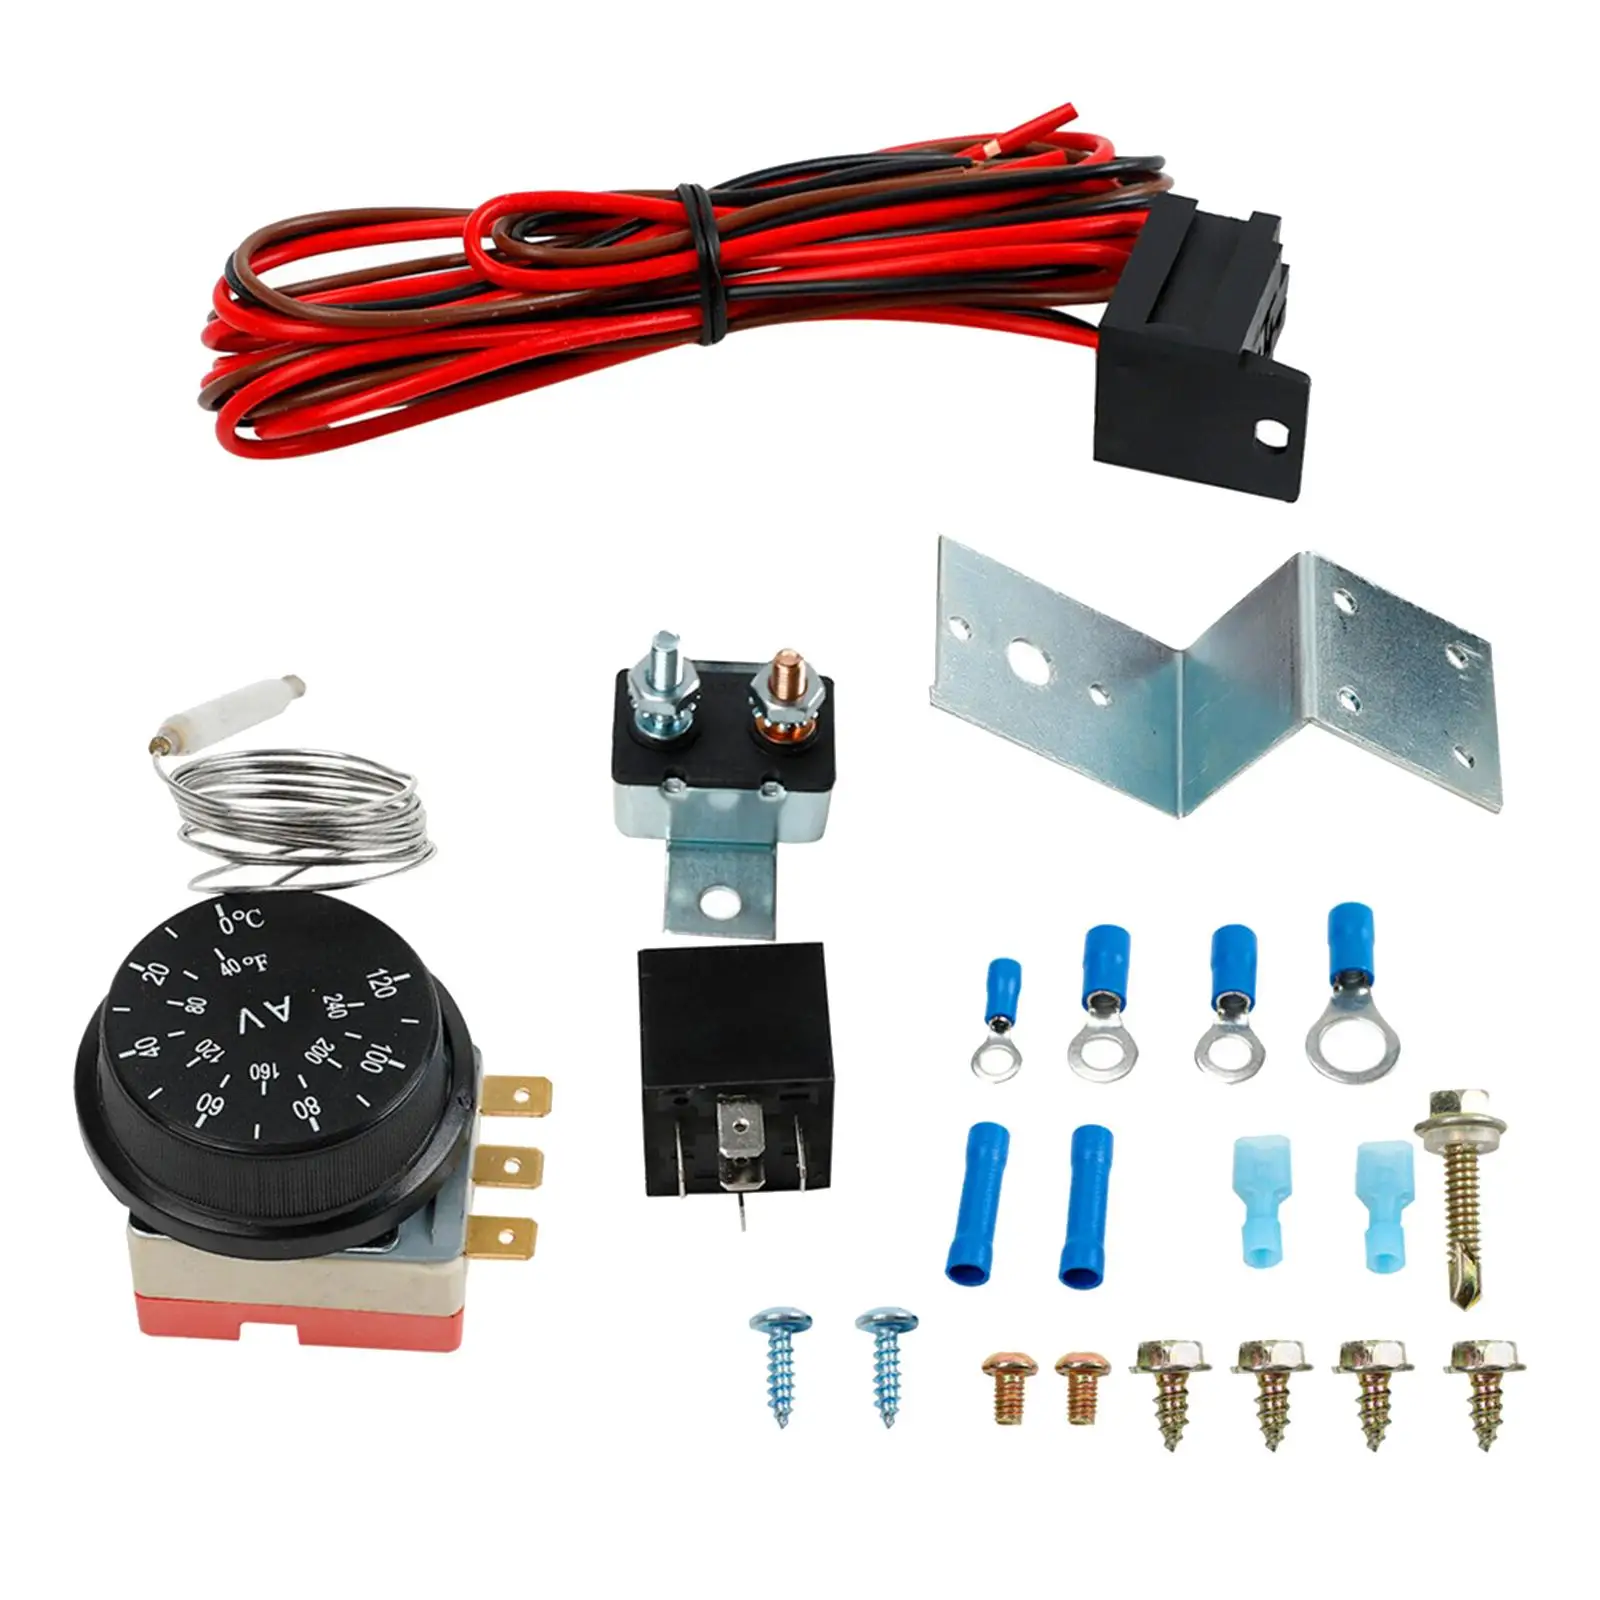 Electric 12V Adjustable Radiator Fan Thermostat 3 Pin Control Relay Wire Kit Car Truck Mounting Hardware Automotive Accessories